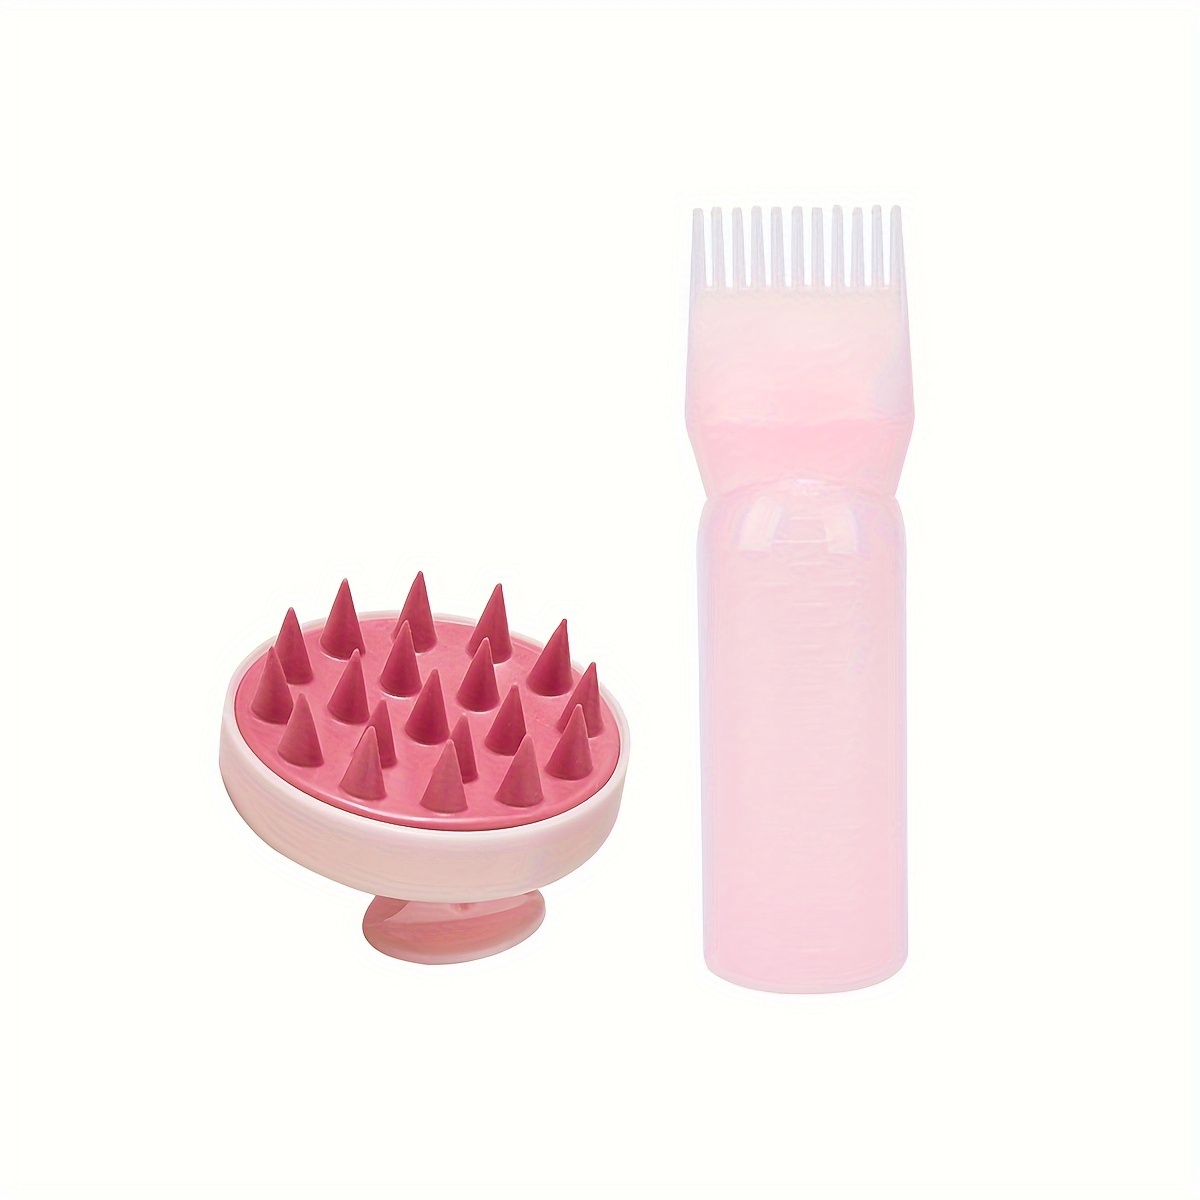 

2pcs/set Root Comb Applicator Bottle With Scalp Massager Shampoo Brush Hair Coloring Dye And Scalp Treatment Tools